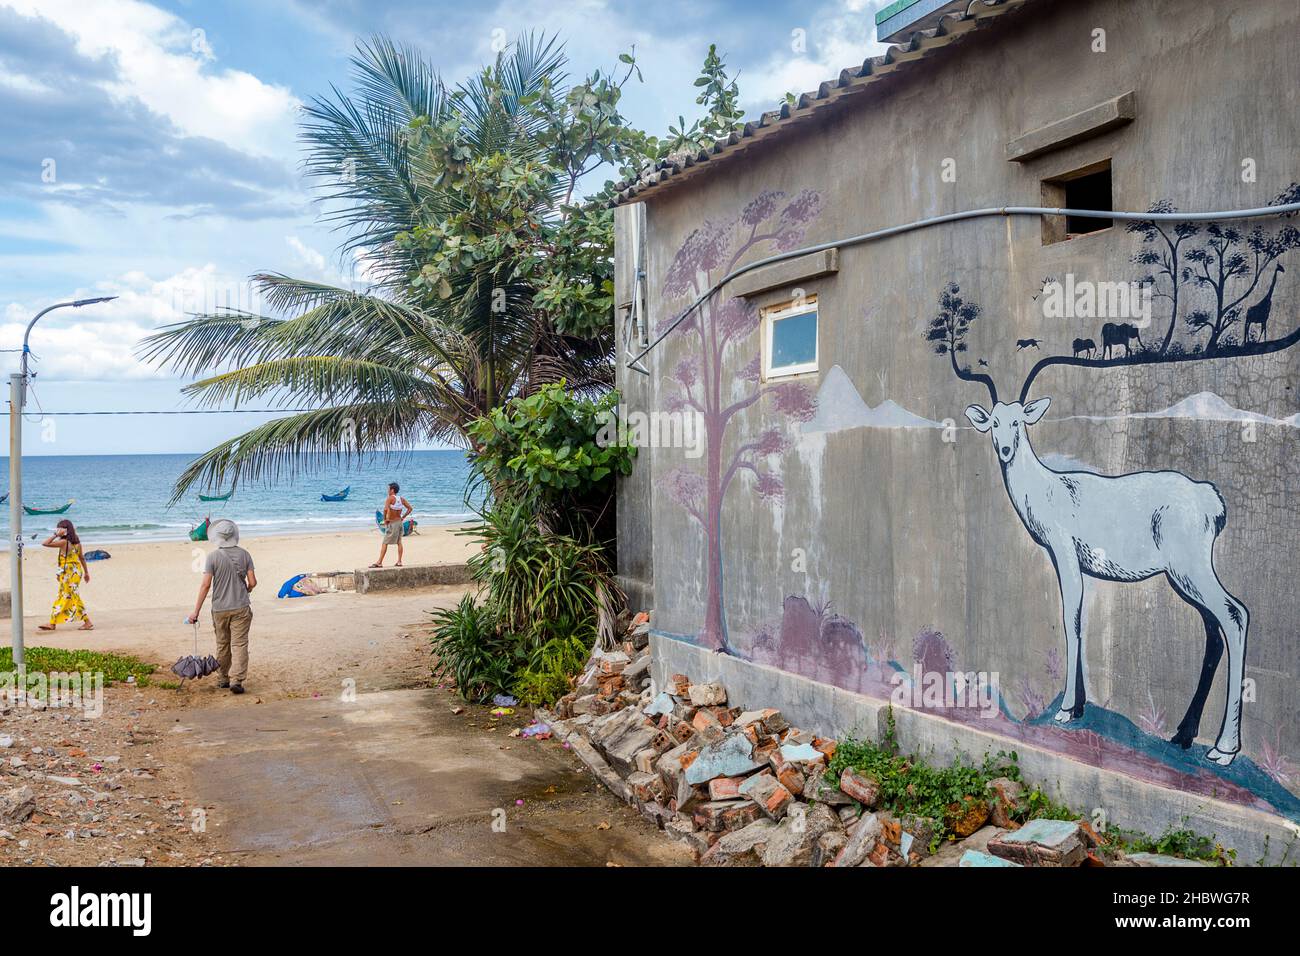 Small alley at Tam Ky that goes to the ocean with murals on painted walls. Stock Photo